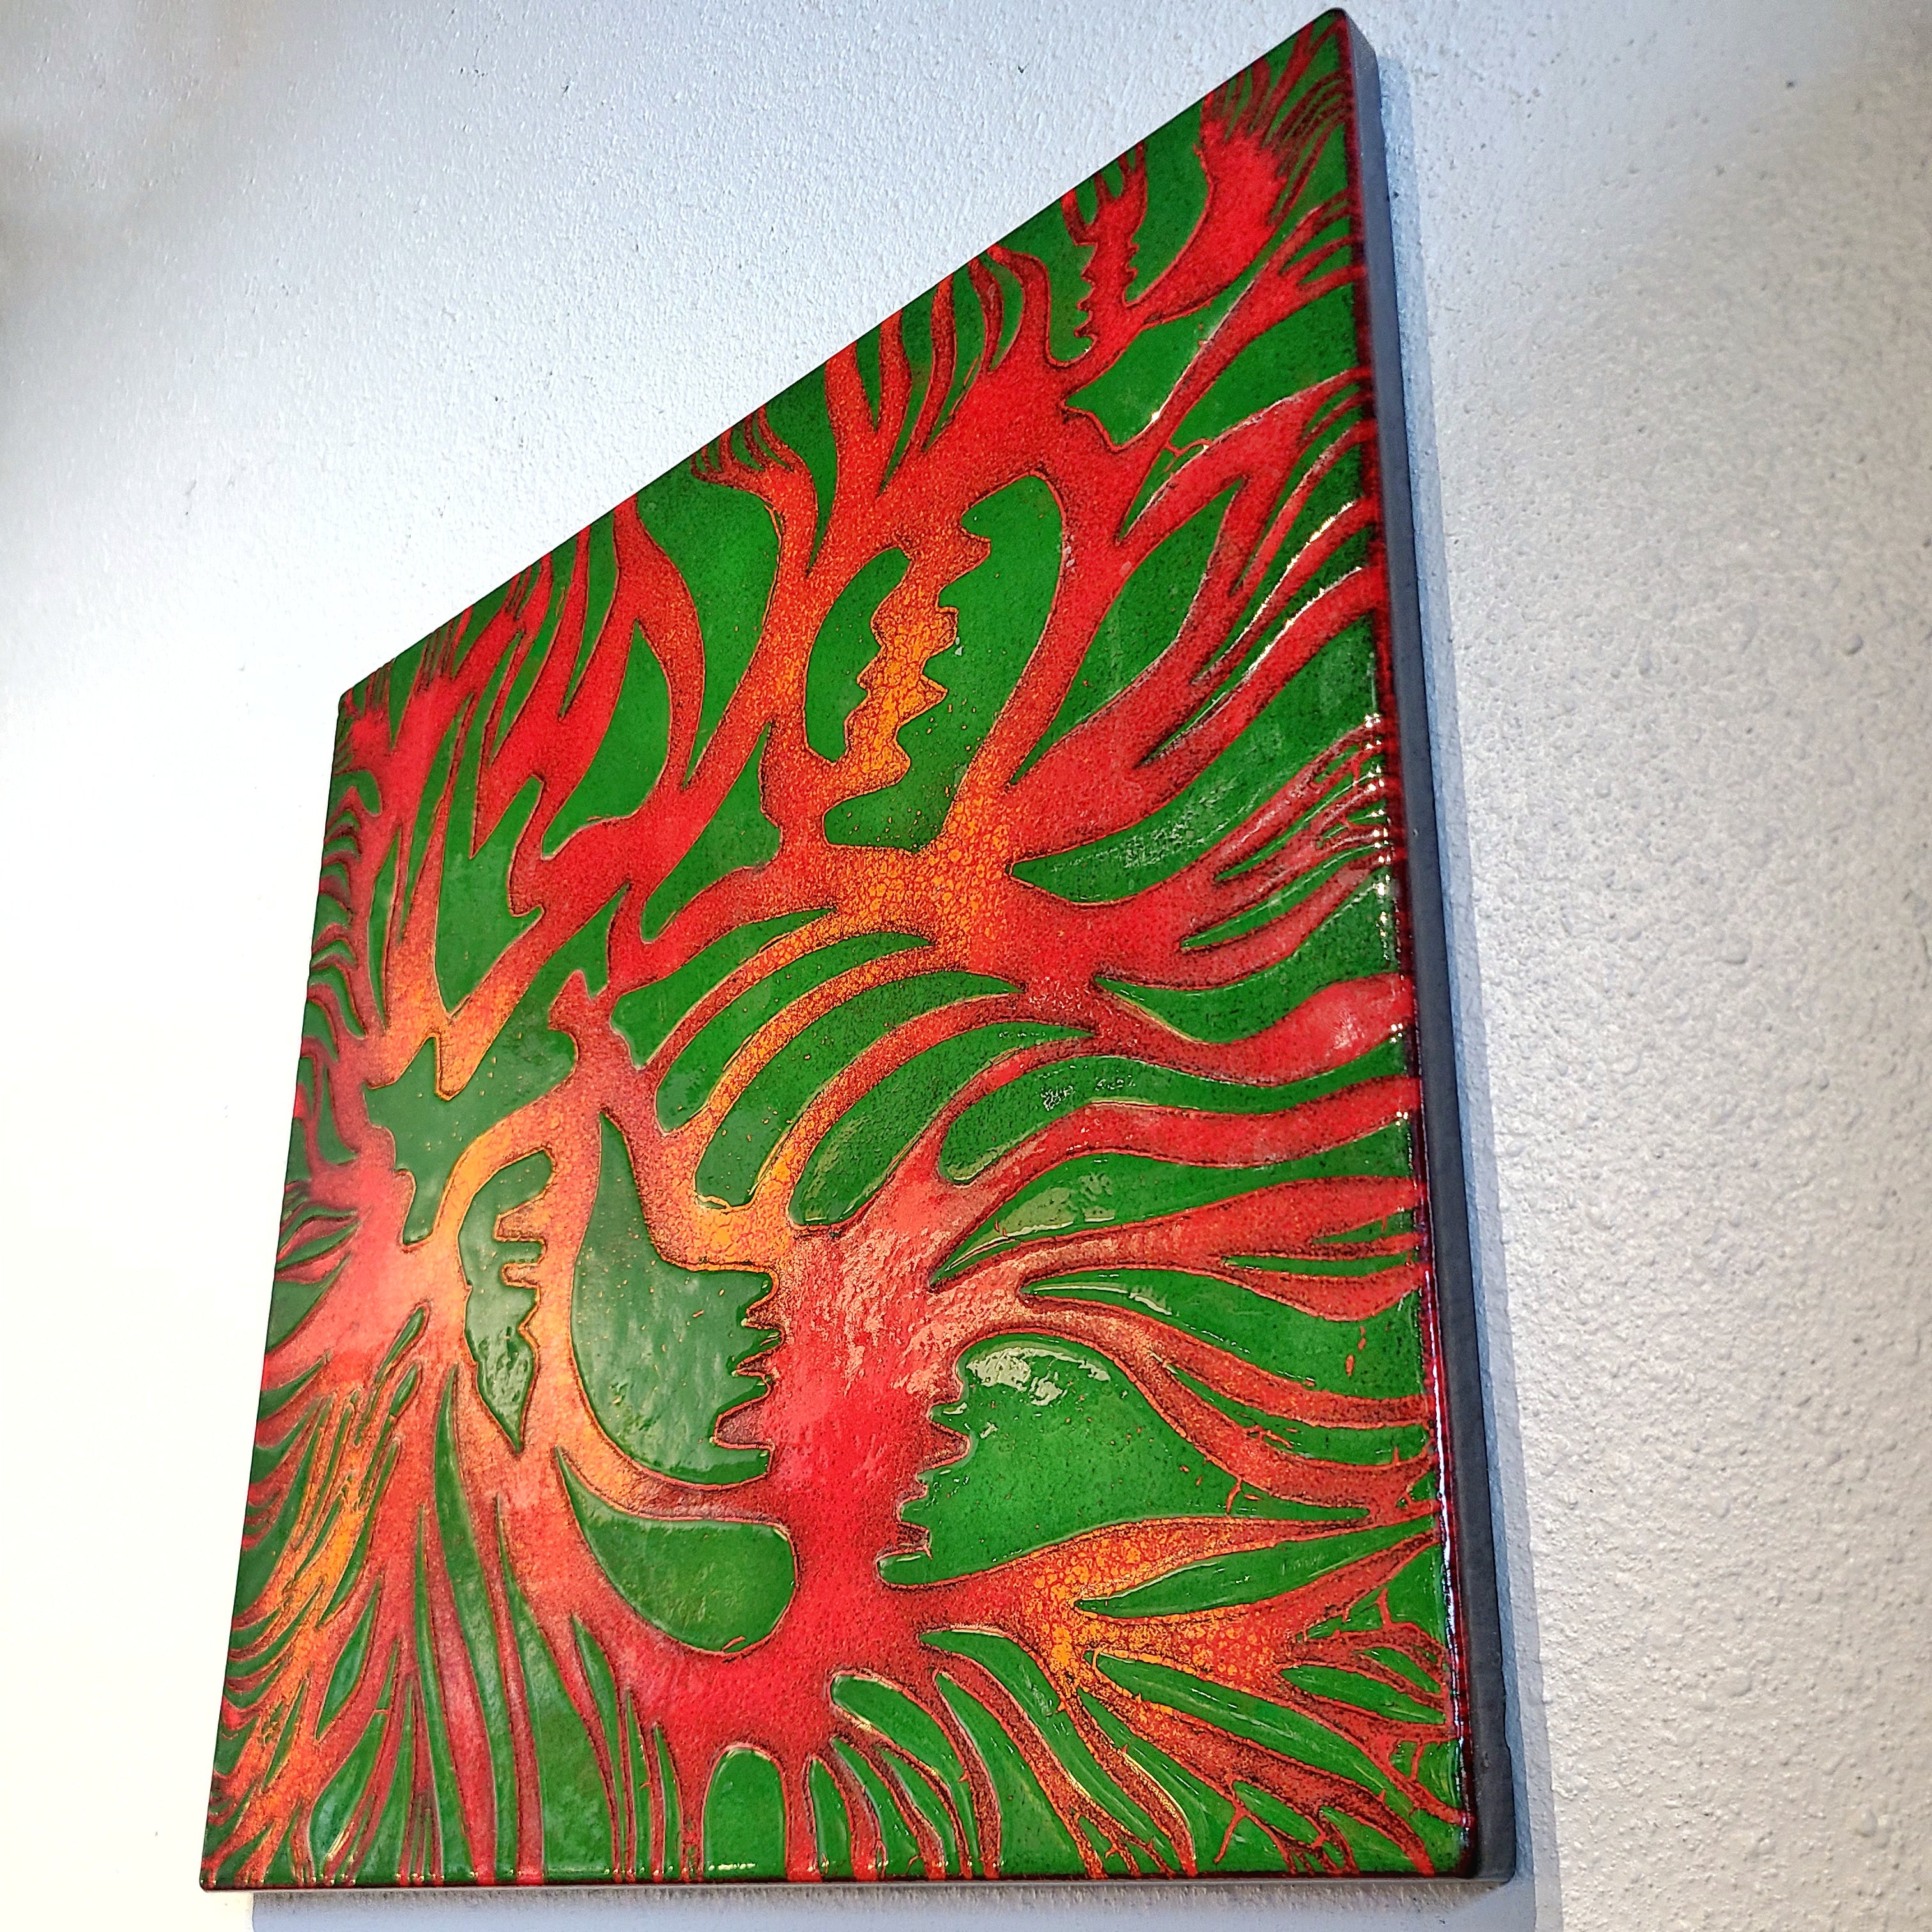 SQUARE ABSTRACT WEST GERMAN ENAMELLED METAL ‘FLAME’ WALL-HANGING